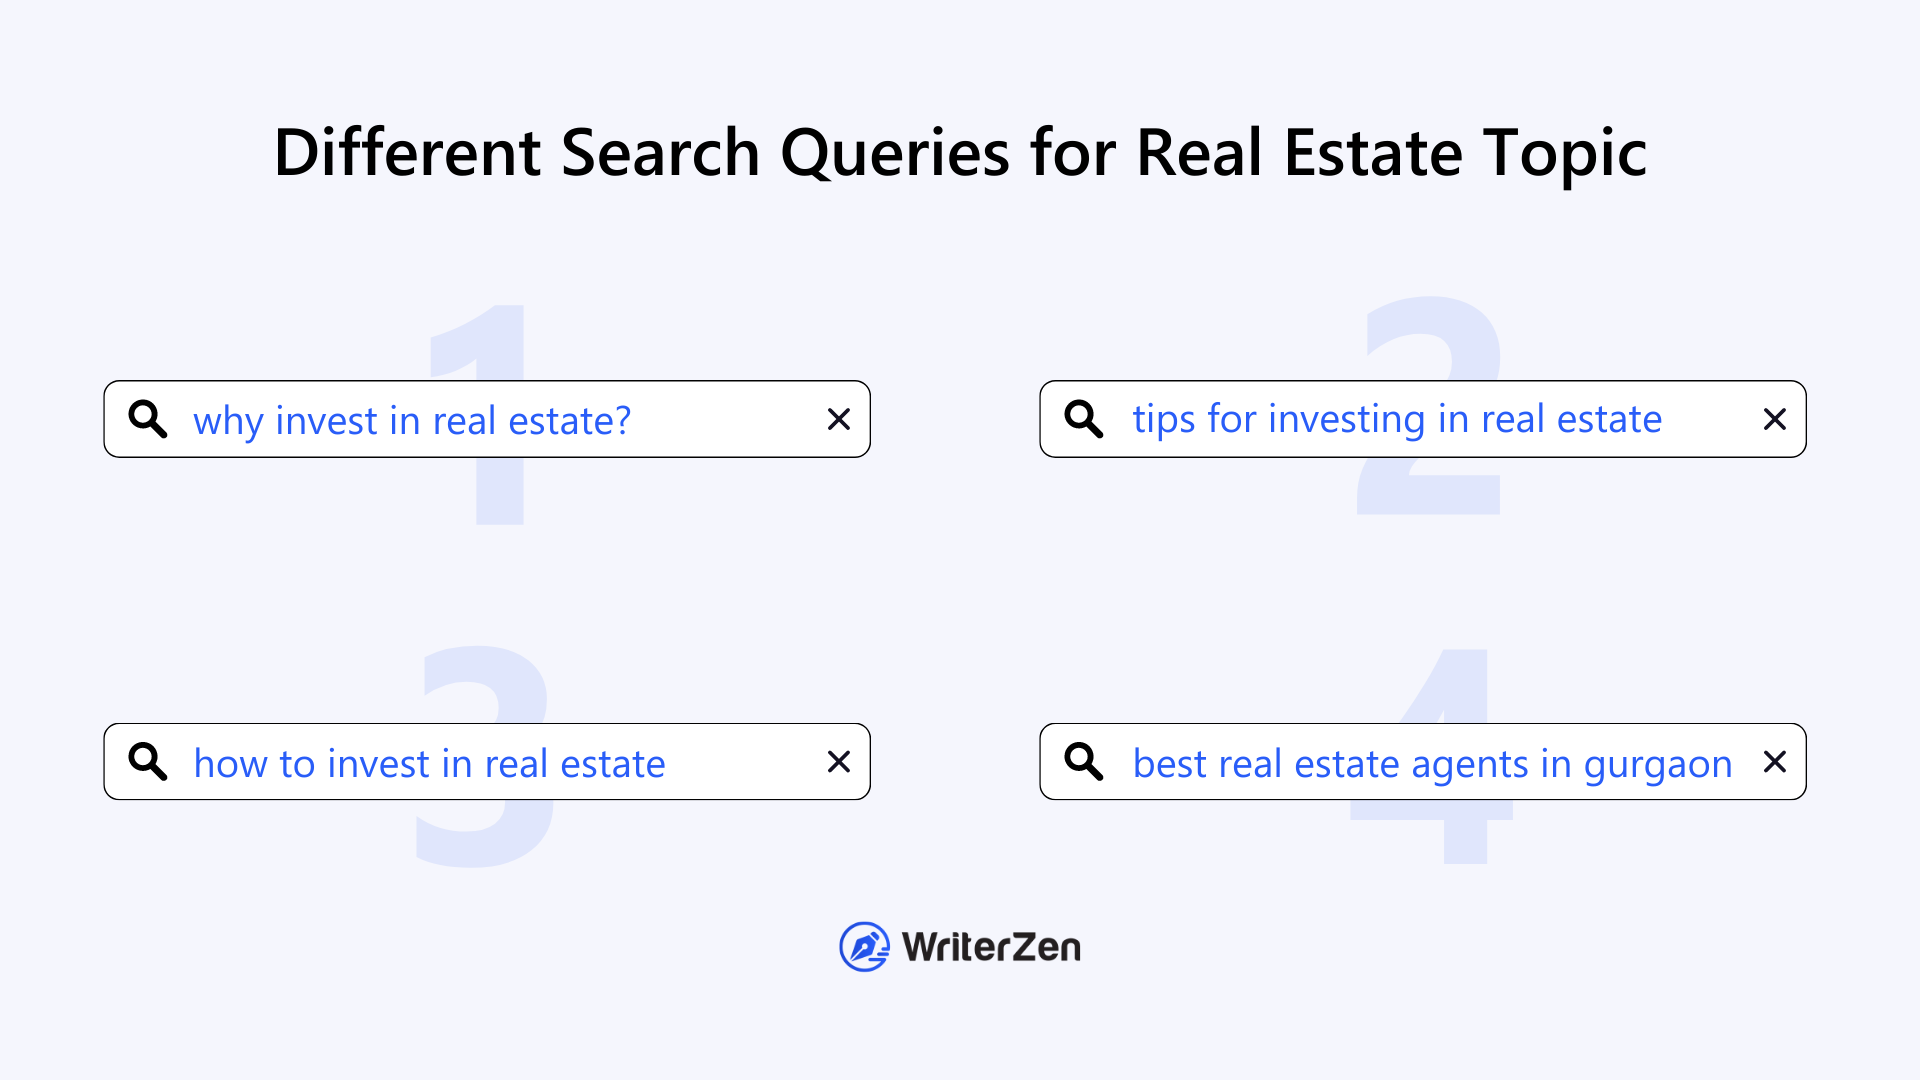 Different Search Queries for Real Estate Topic